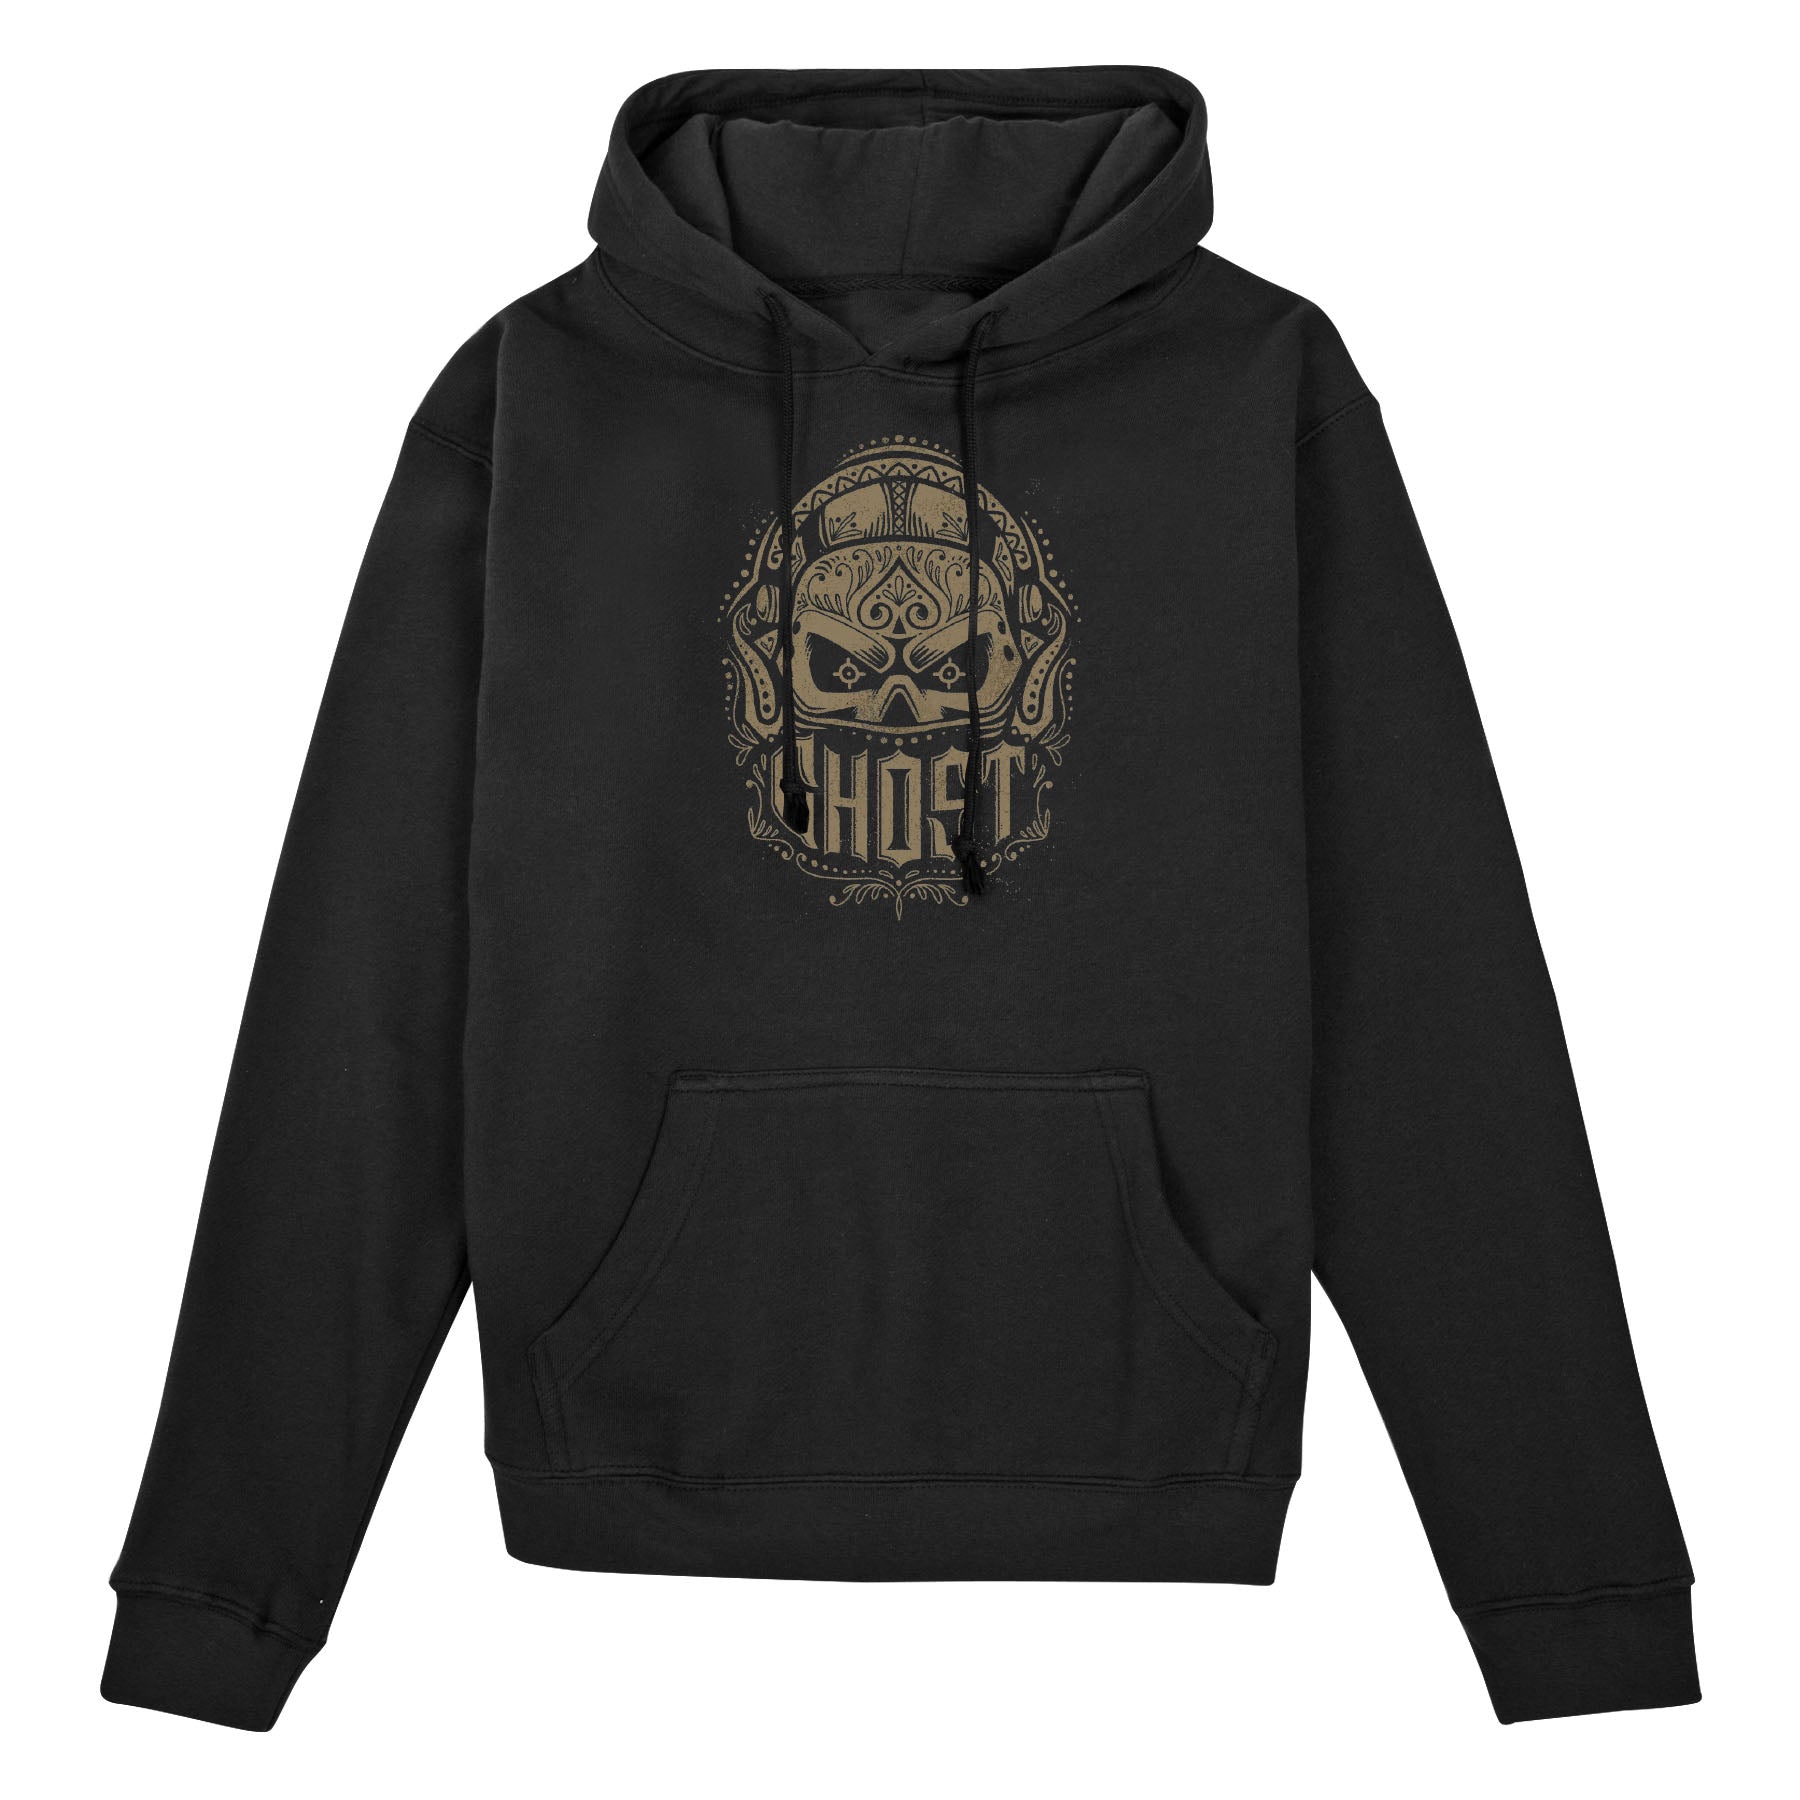 Call of Duty Black Ghost Skull Mask Hoodie - Front View with Ghost Skull Design